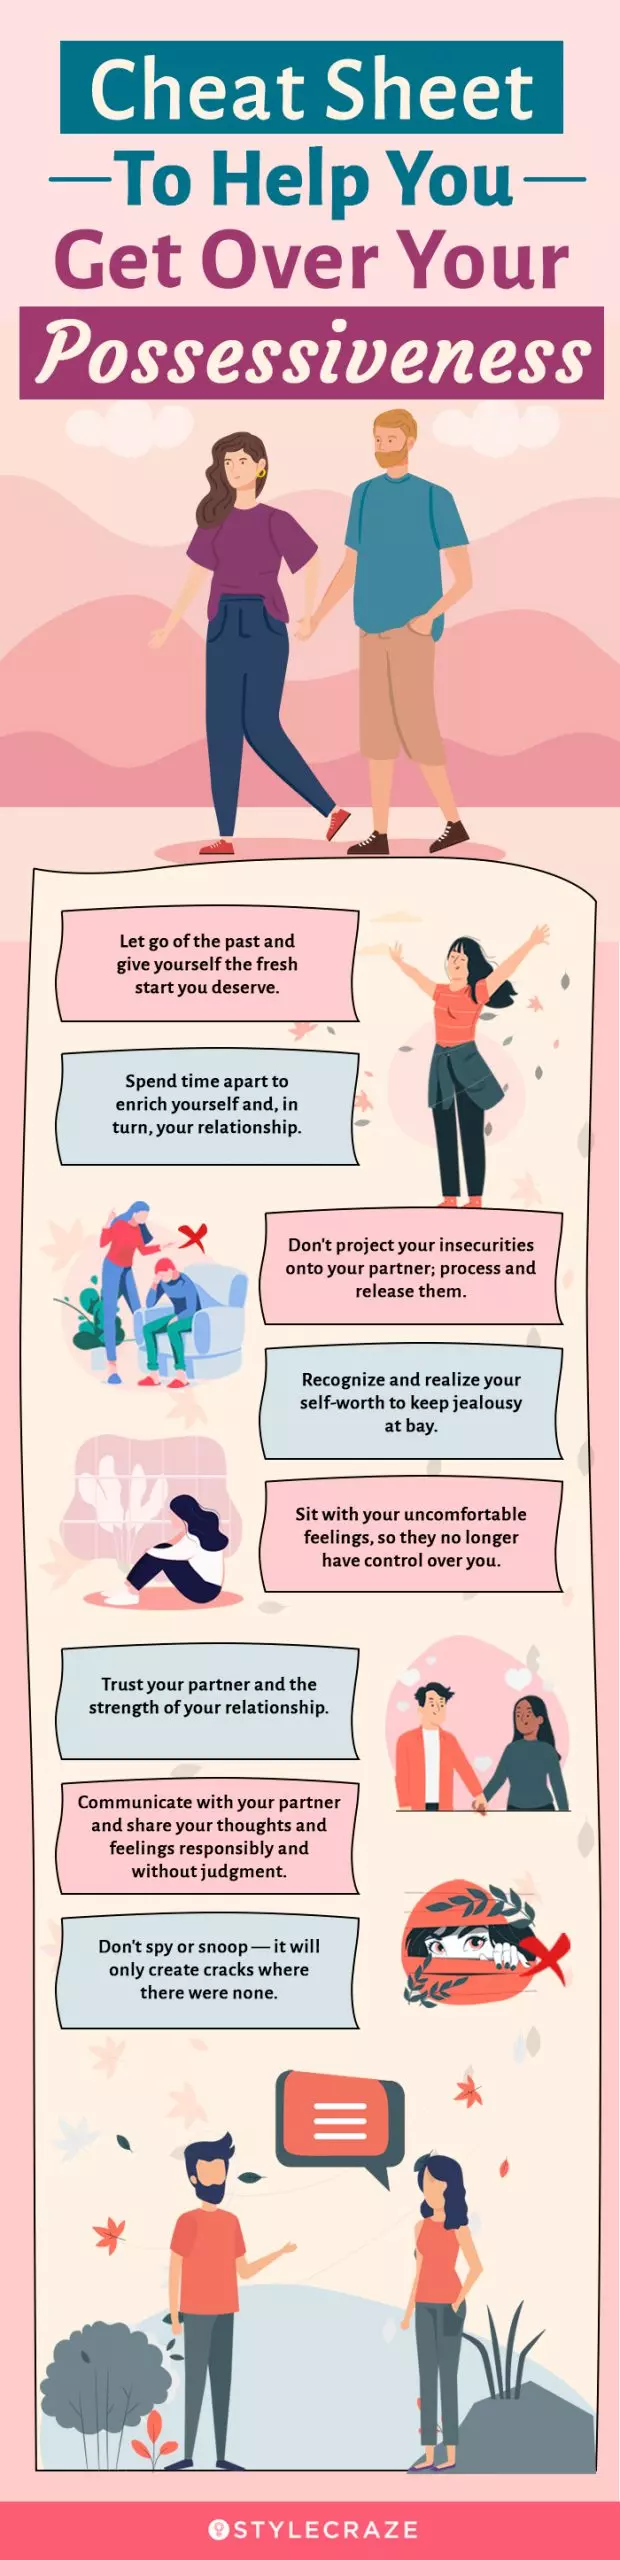 cheat sheet to help you get over your possessiveness (infographic)